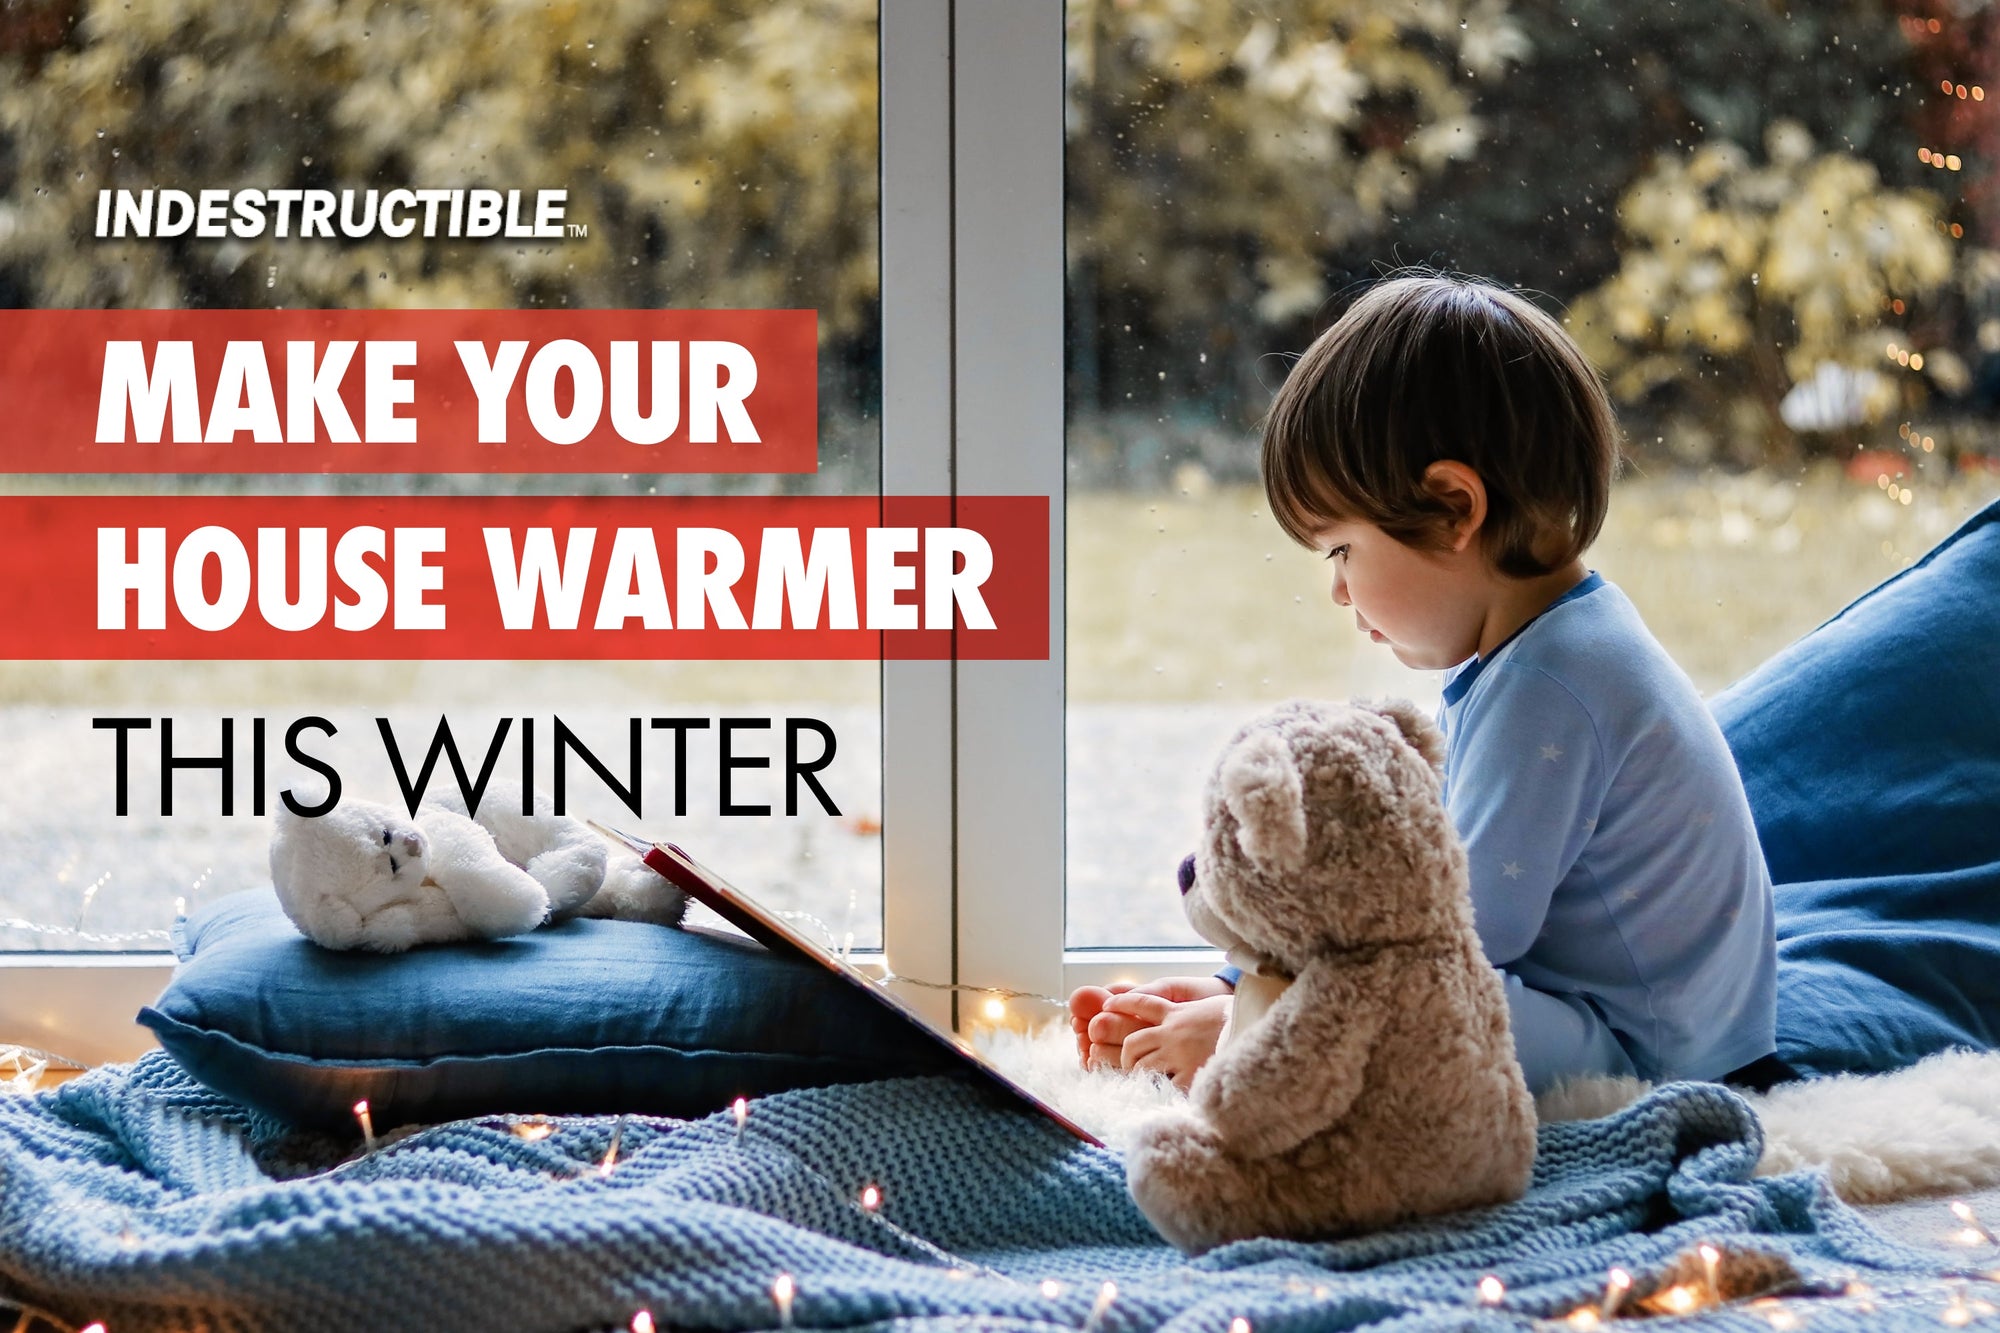 How to make your home warmer this winter